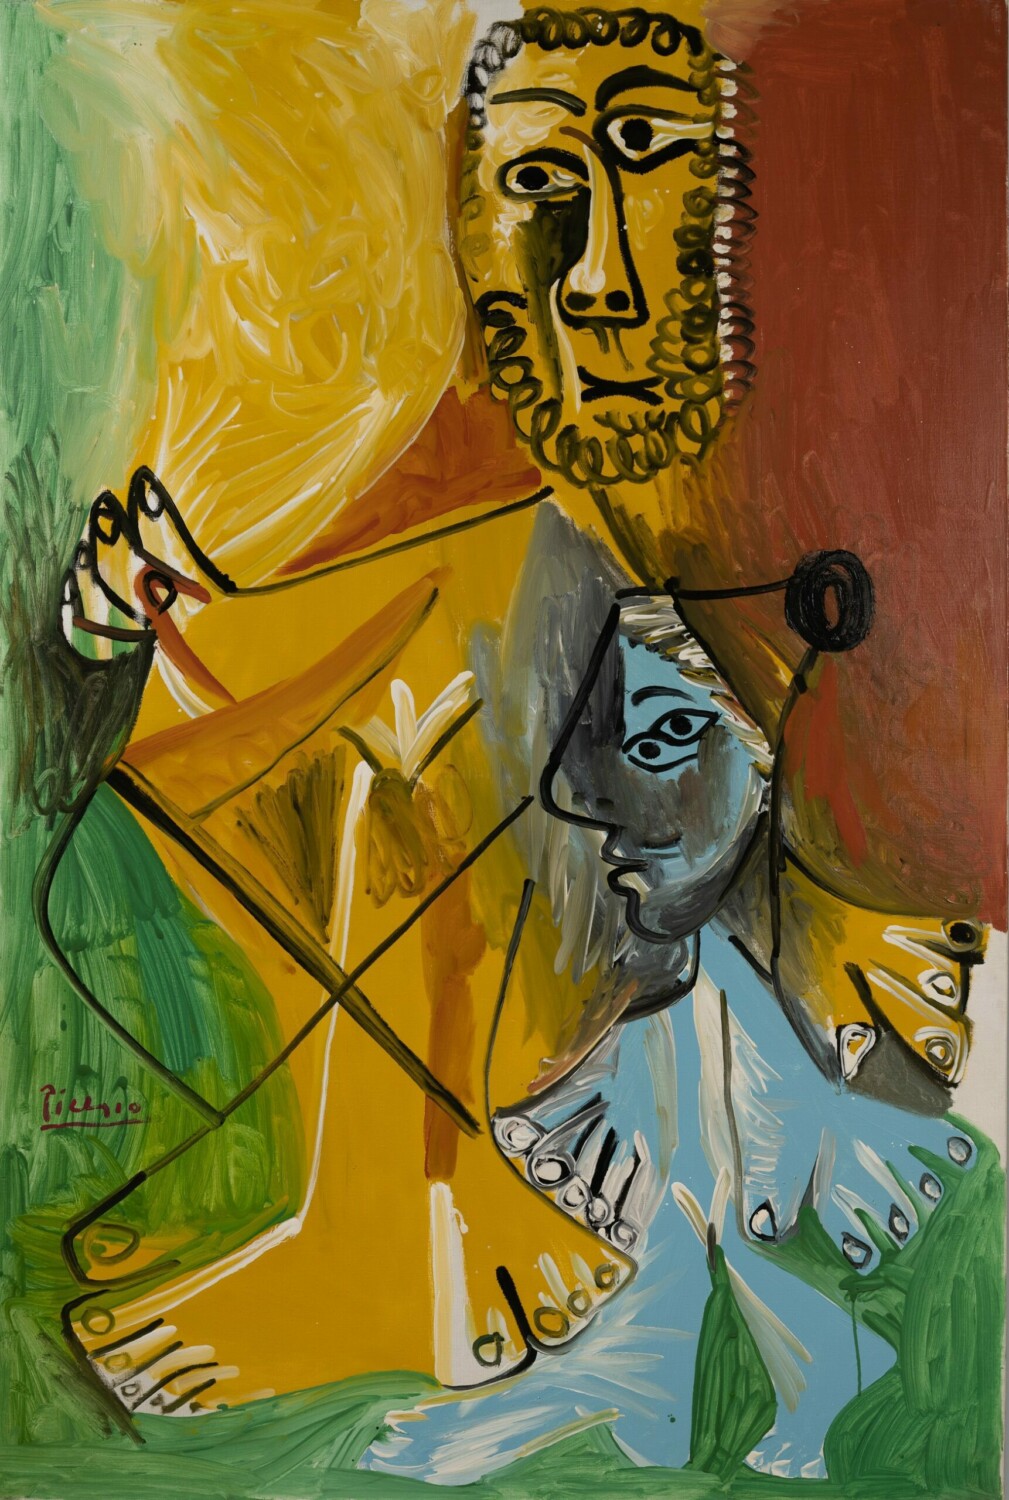 Pablo Picasso  Homme et enfant  Painted on July 4, 1969.  Oil and ripolin on canvas  Estimate $20/30 million  © 2021 Estate of Pablo Picasso / Artists Rights Society (ARS), New York